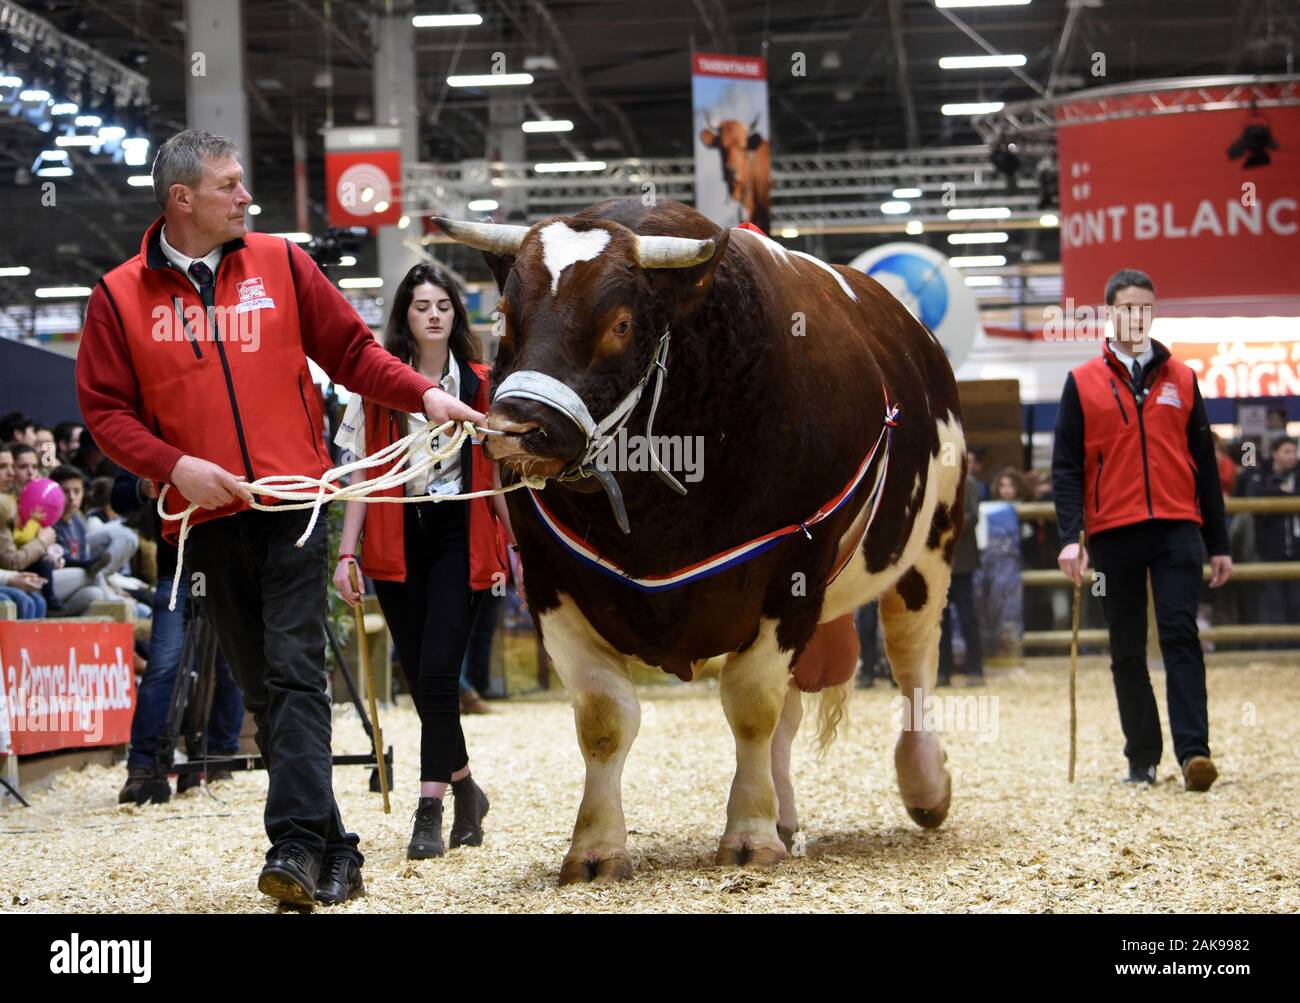 Paris, “Porte de Versailles” city gate, on March 1, 2019: International Agricultural Show. Atmosphere at the fair during the General Agricultural Comp Stock Photo